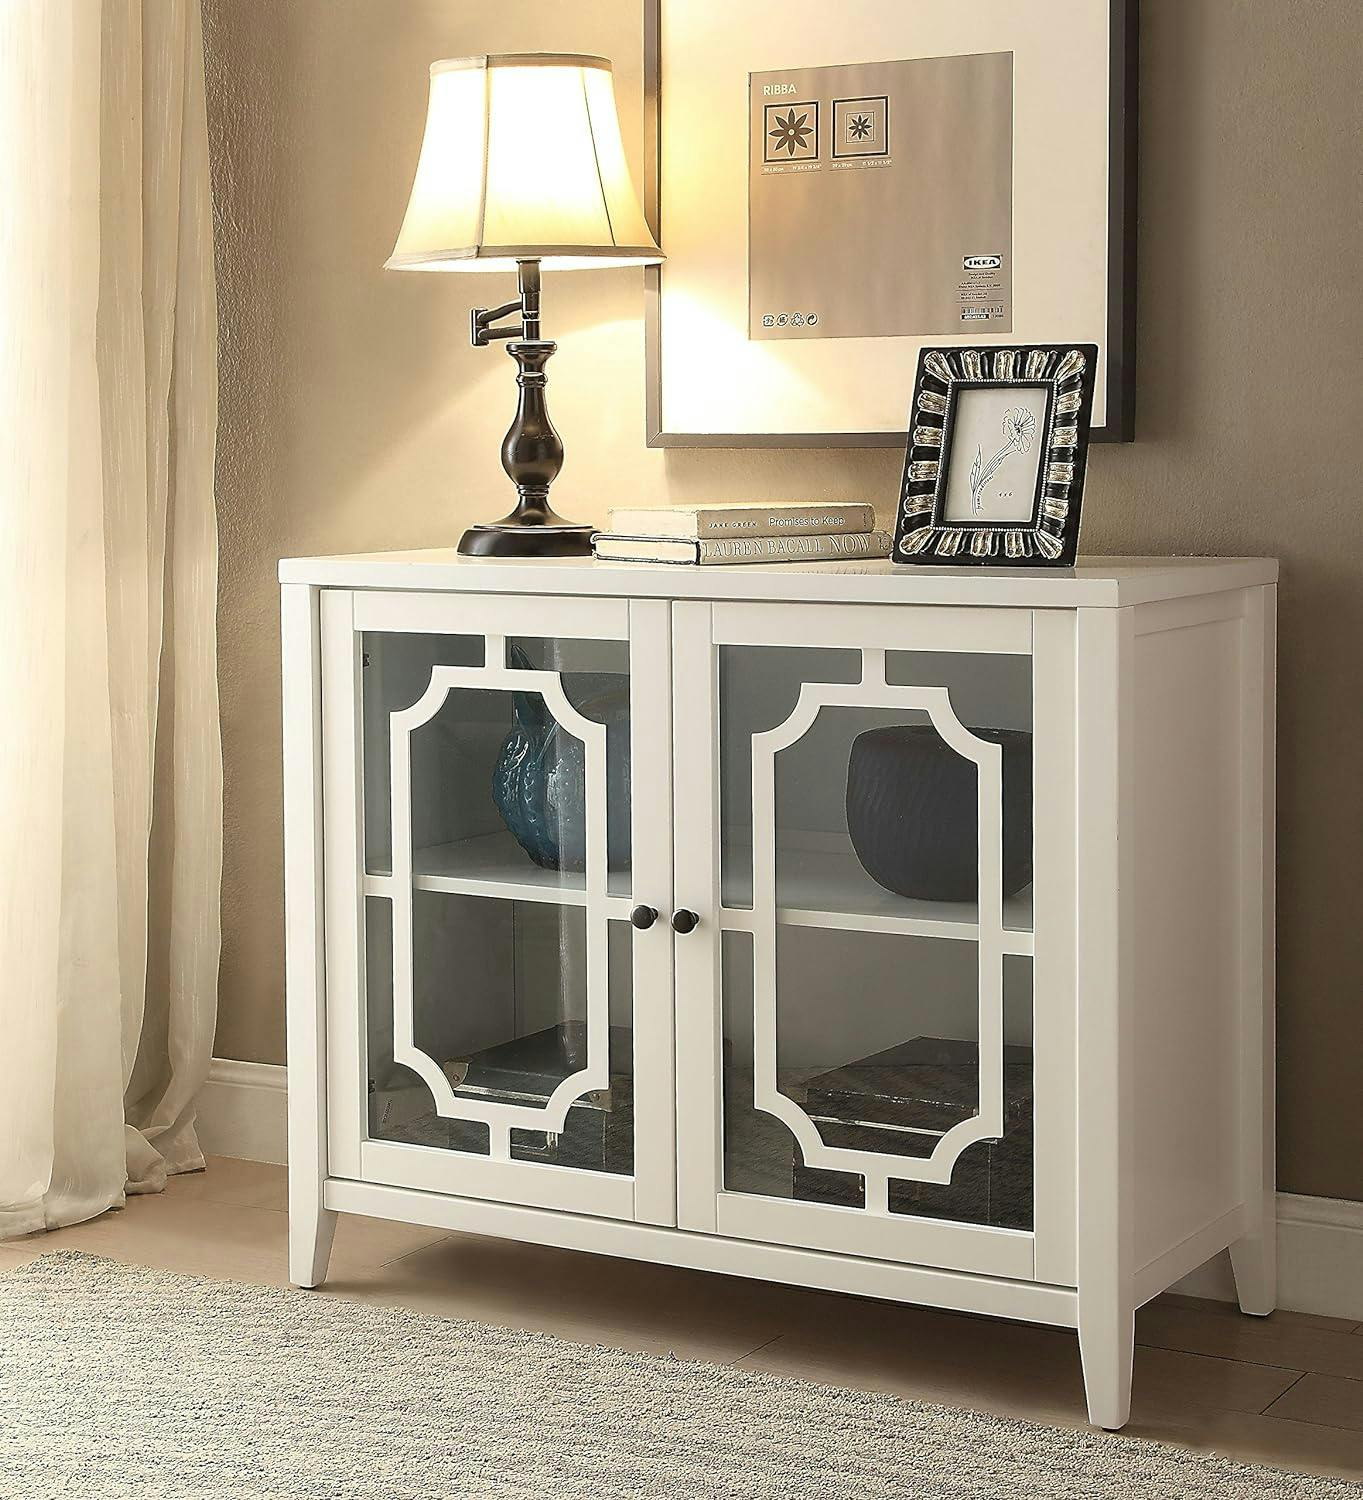 Classic Romantic White Wooden Console Table with Glass Storage